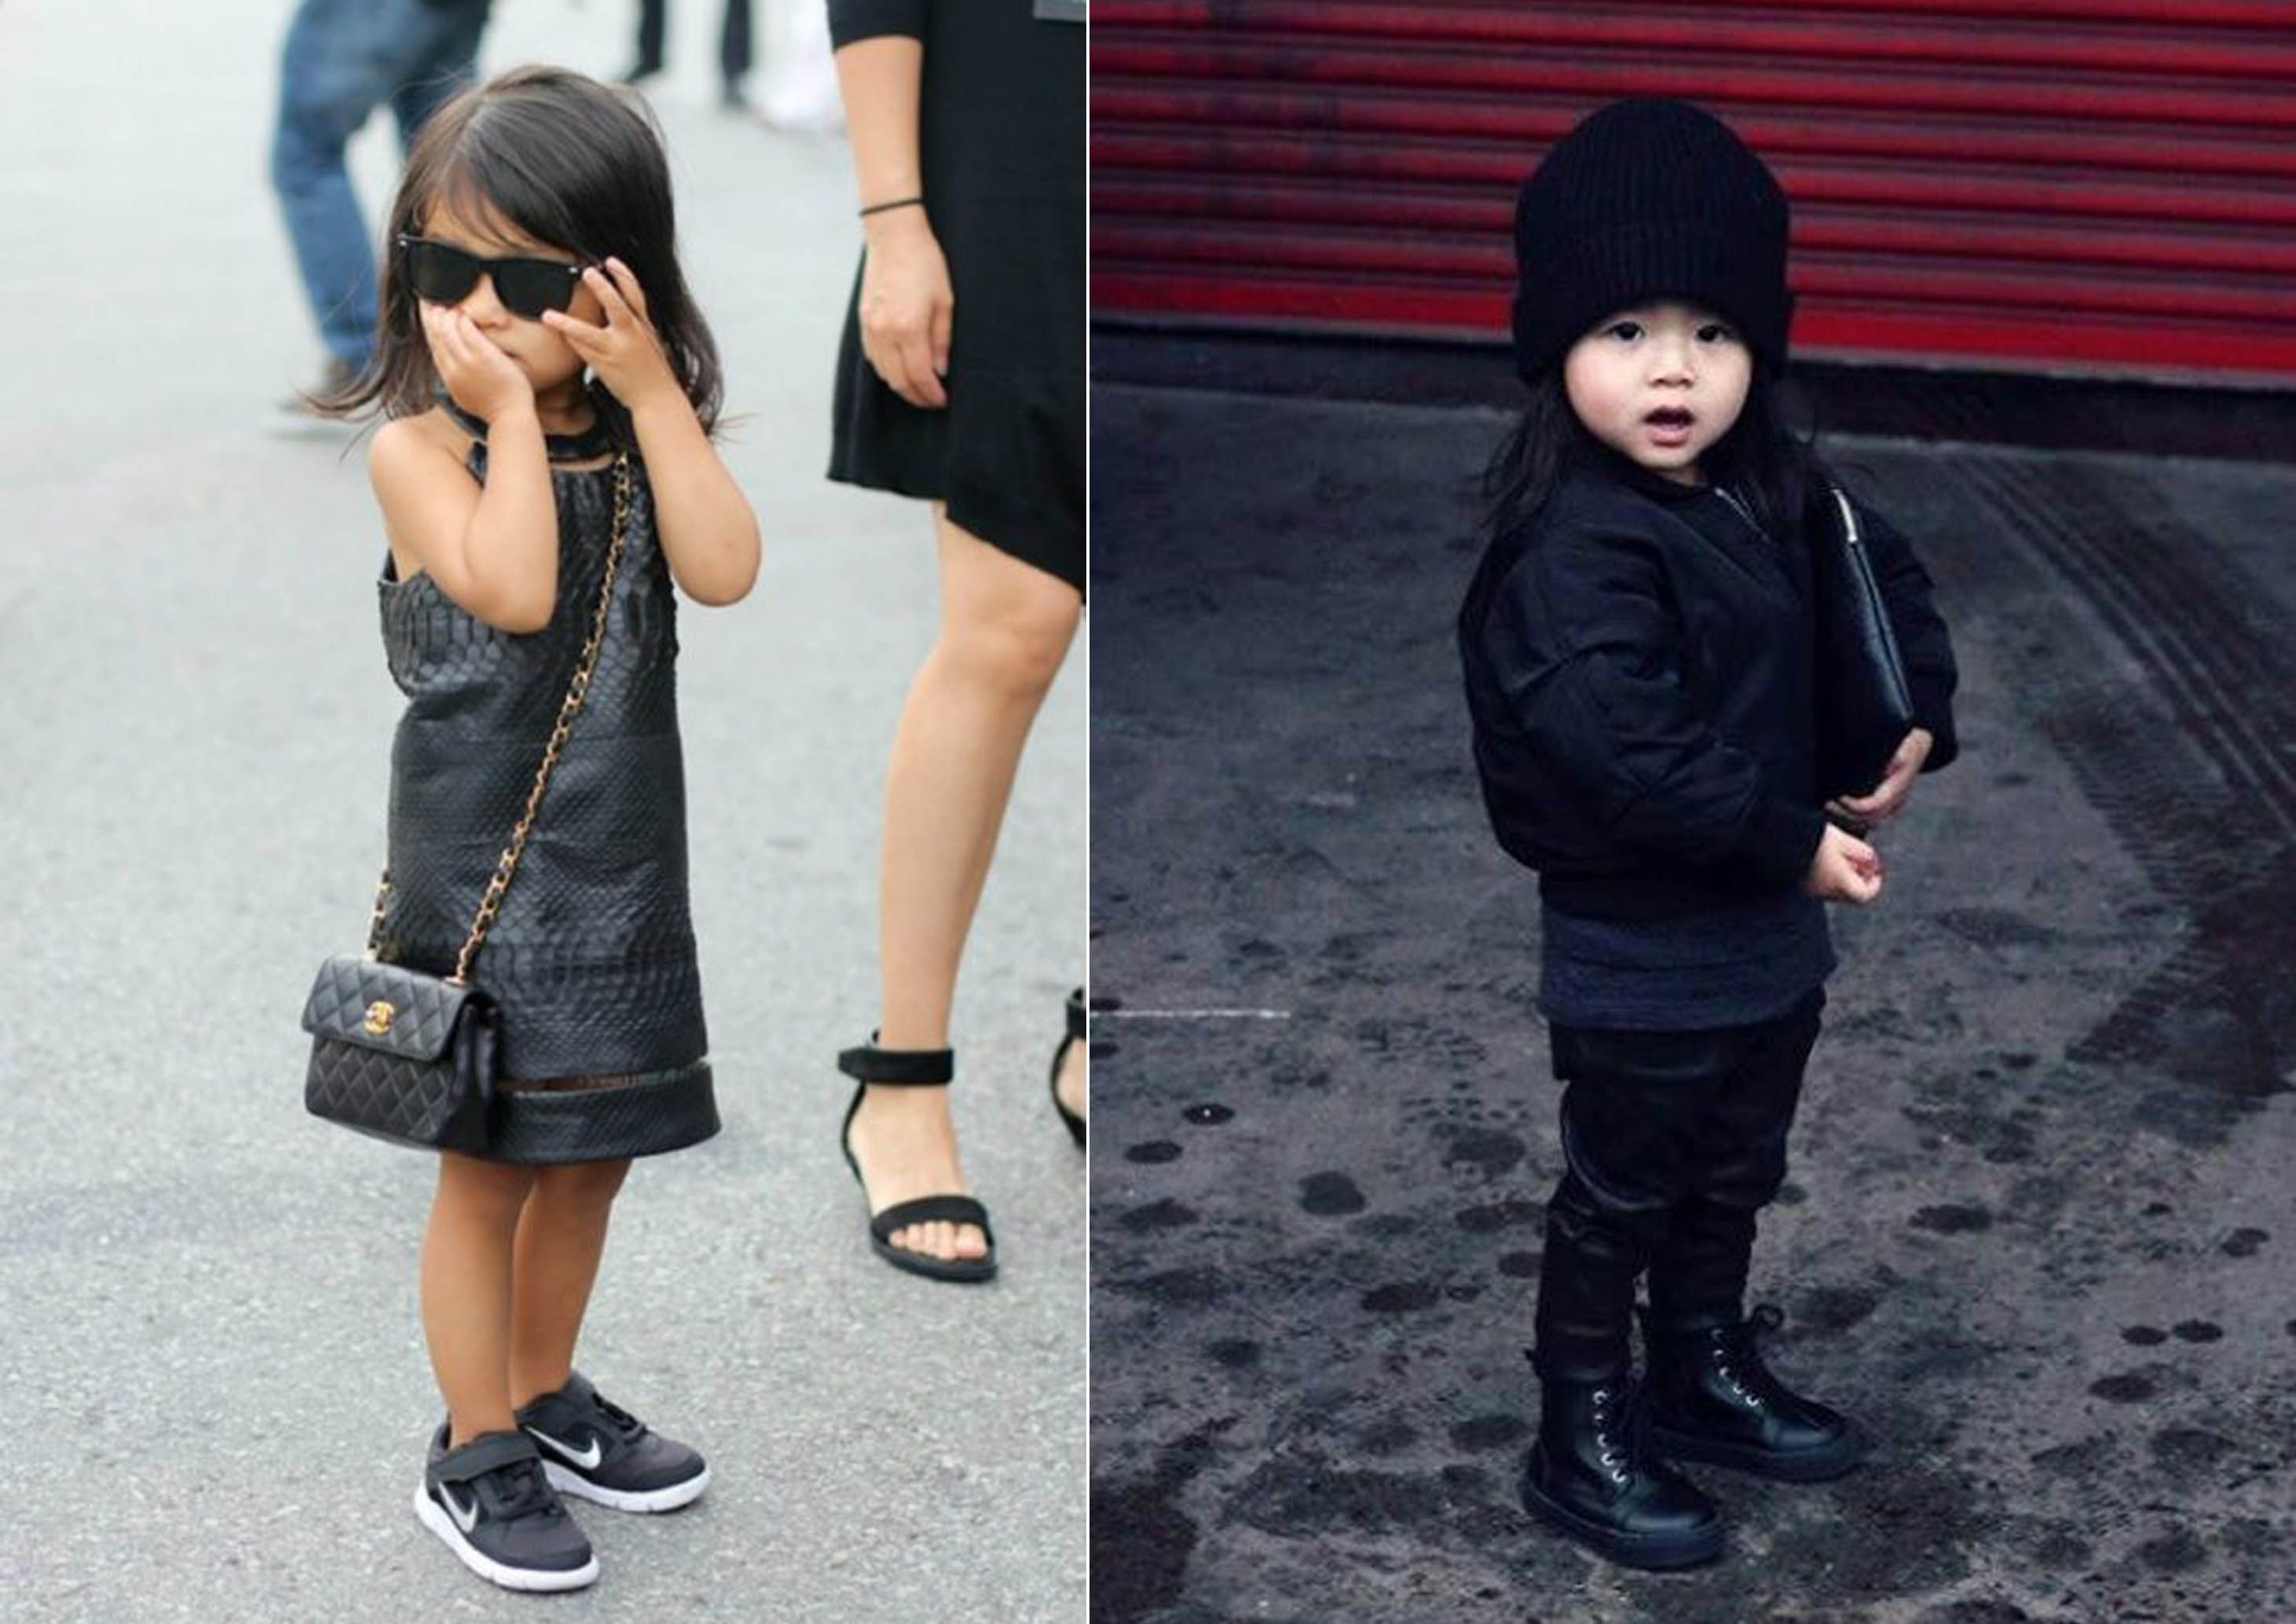 Let's get acquainted with the adorable Super Girl Aila Wang 